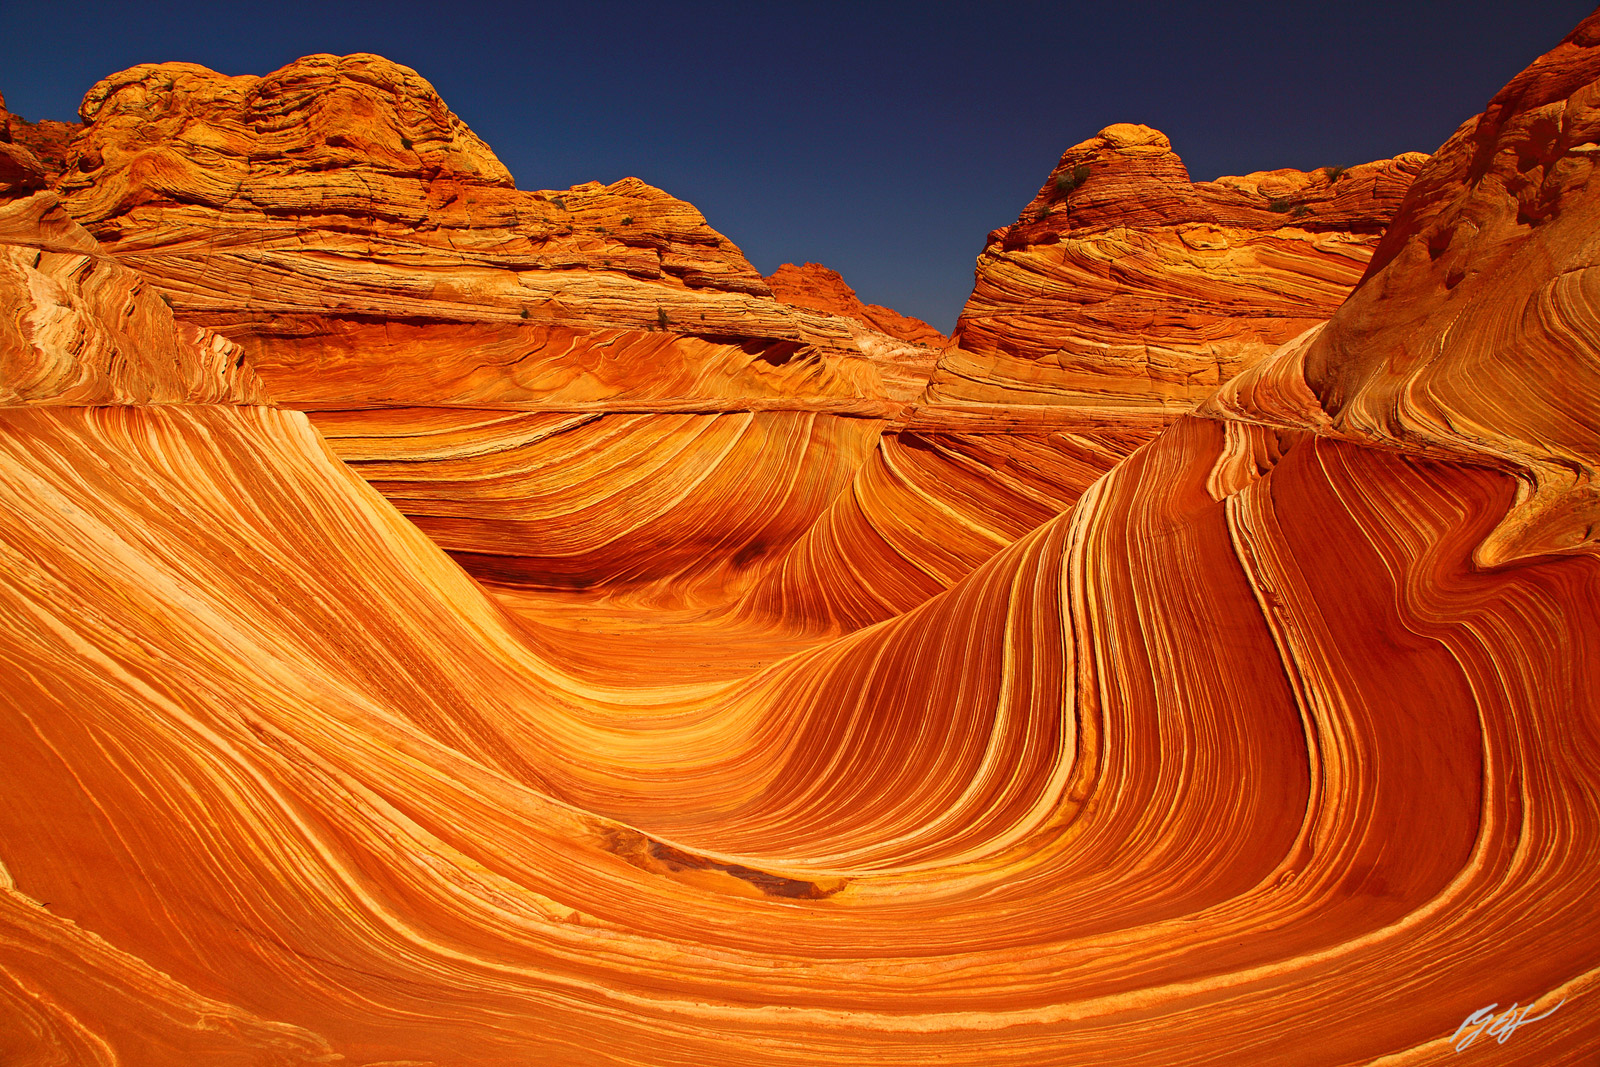 The Wave in Coyote Buttes North in the Vermillion Cliffs Wilderness in Arizona